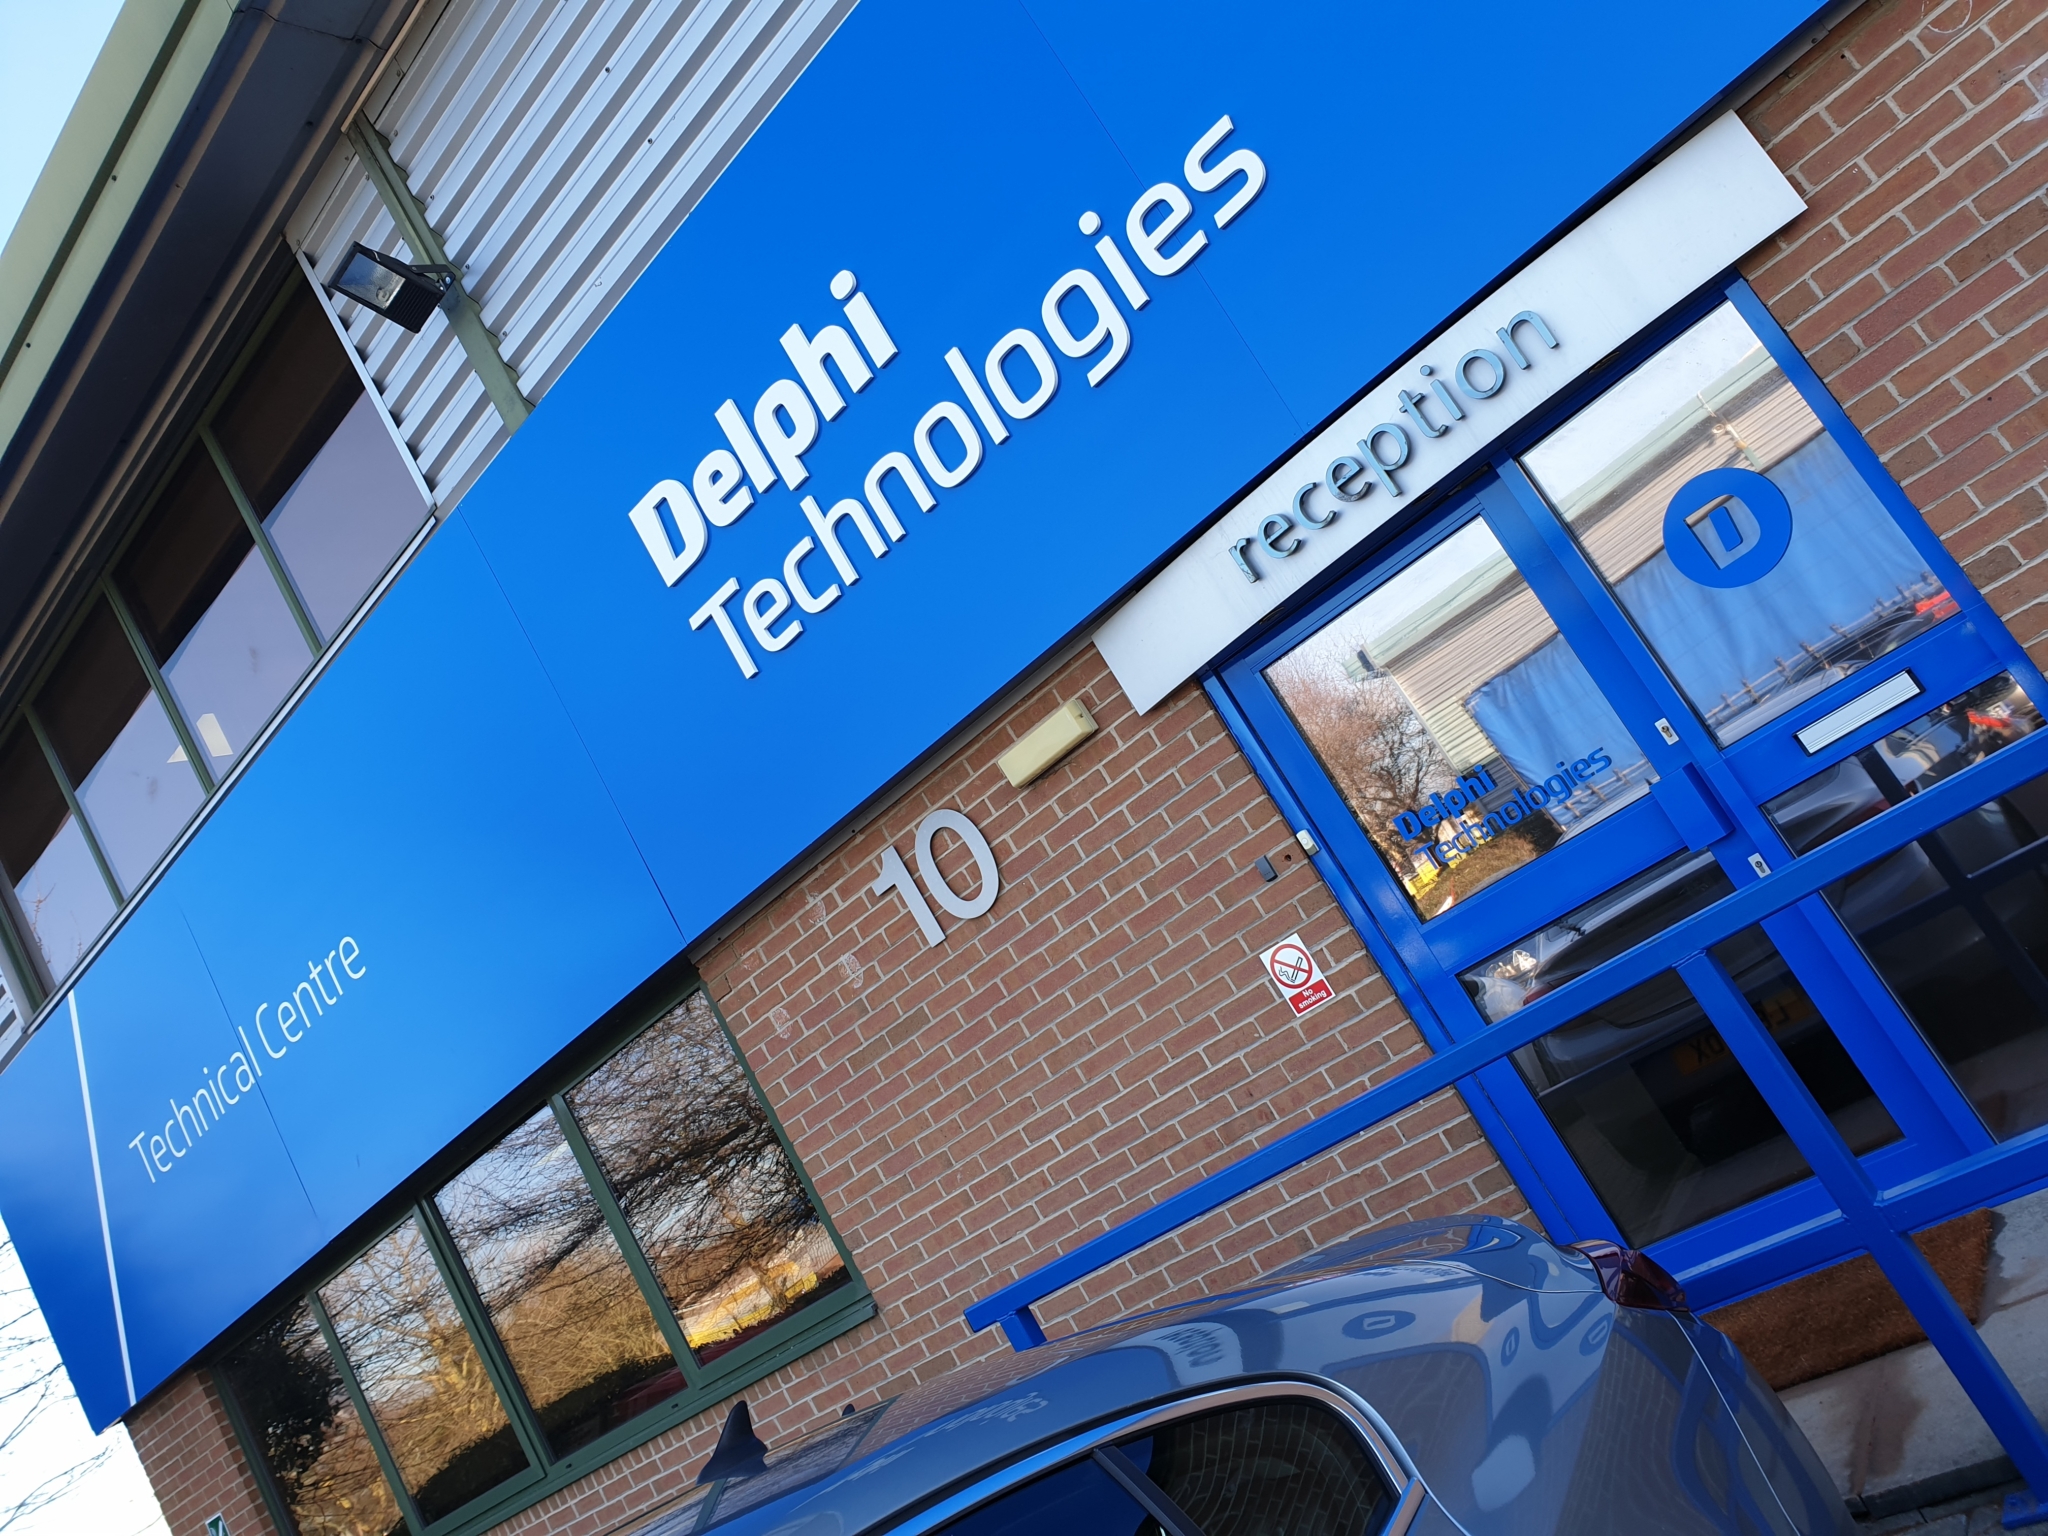 Delphi Training Centre retains IMI approval, ADAS and EV course in demand